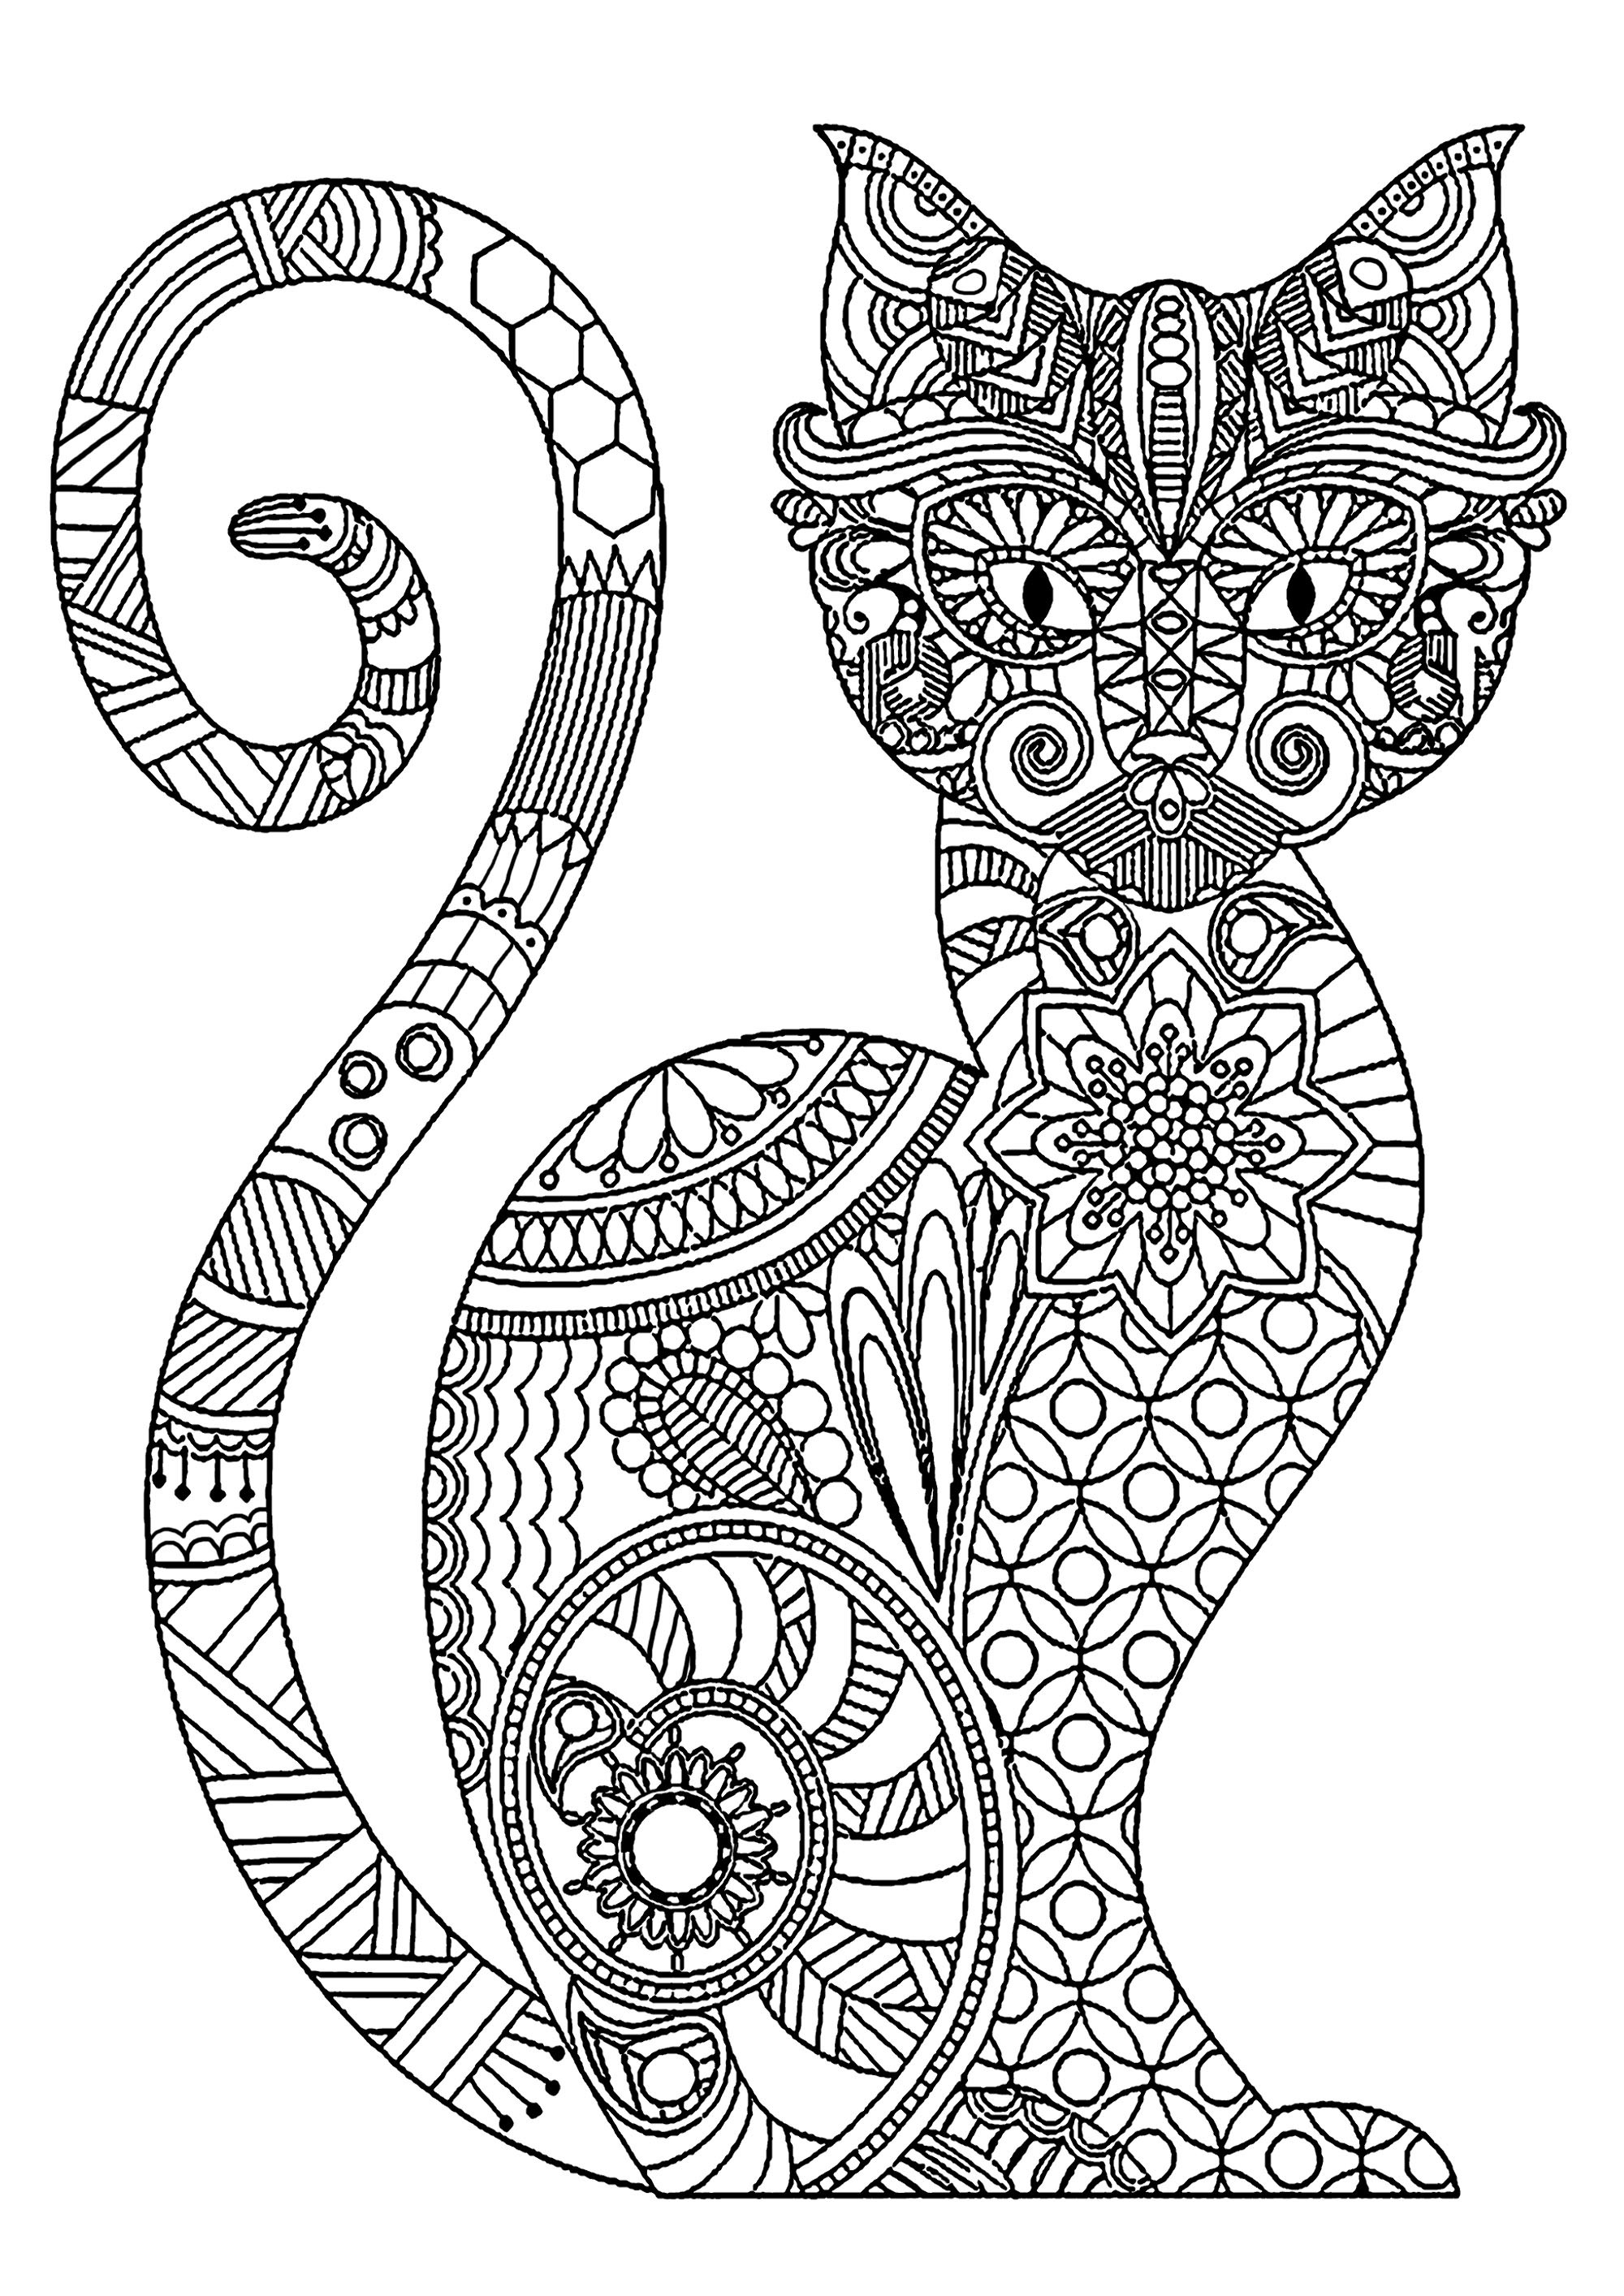 Coloring Pages For Adults Cats
 Elegant cat with plex patterns Cats Adult Coloring Pages